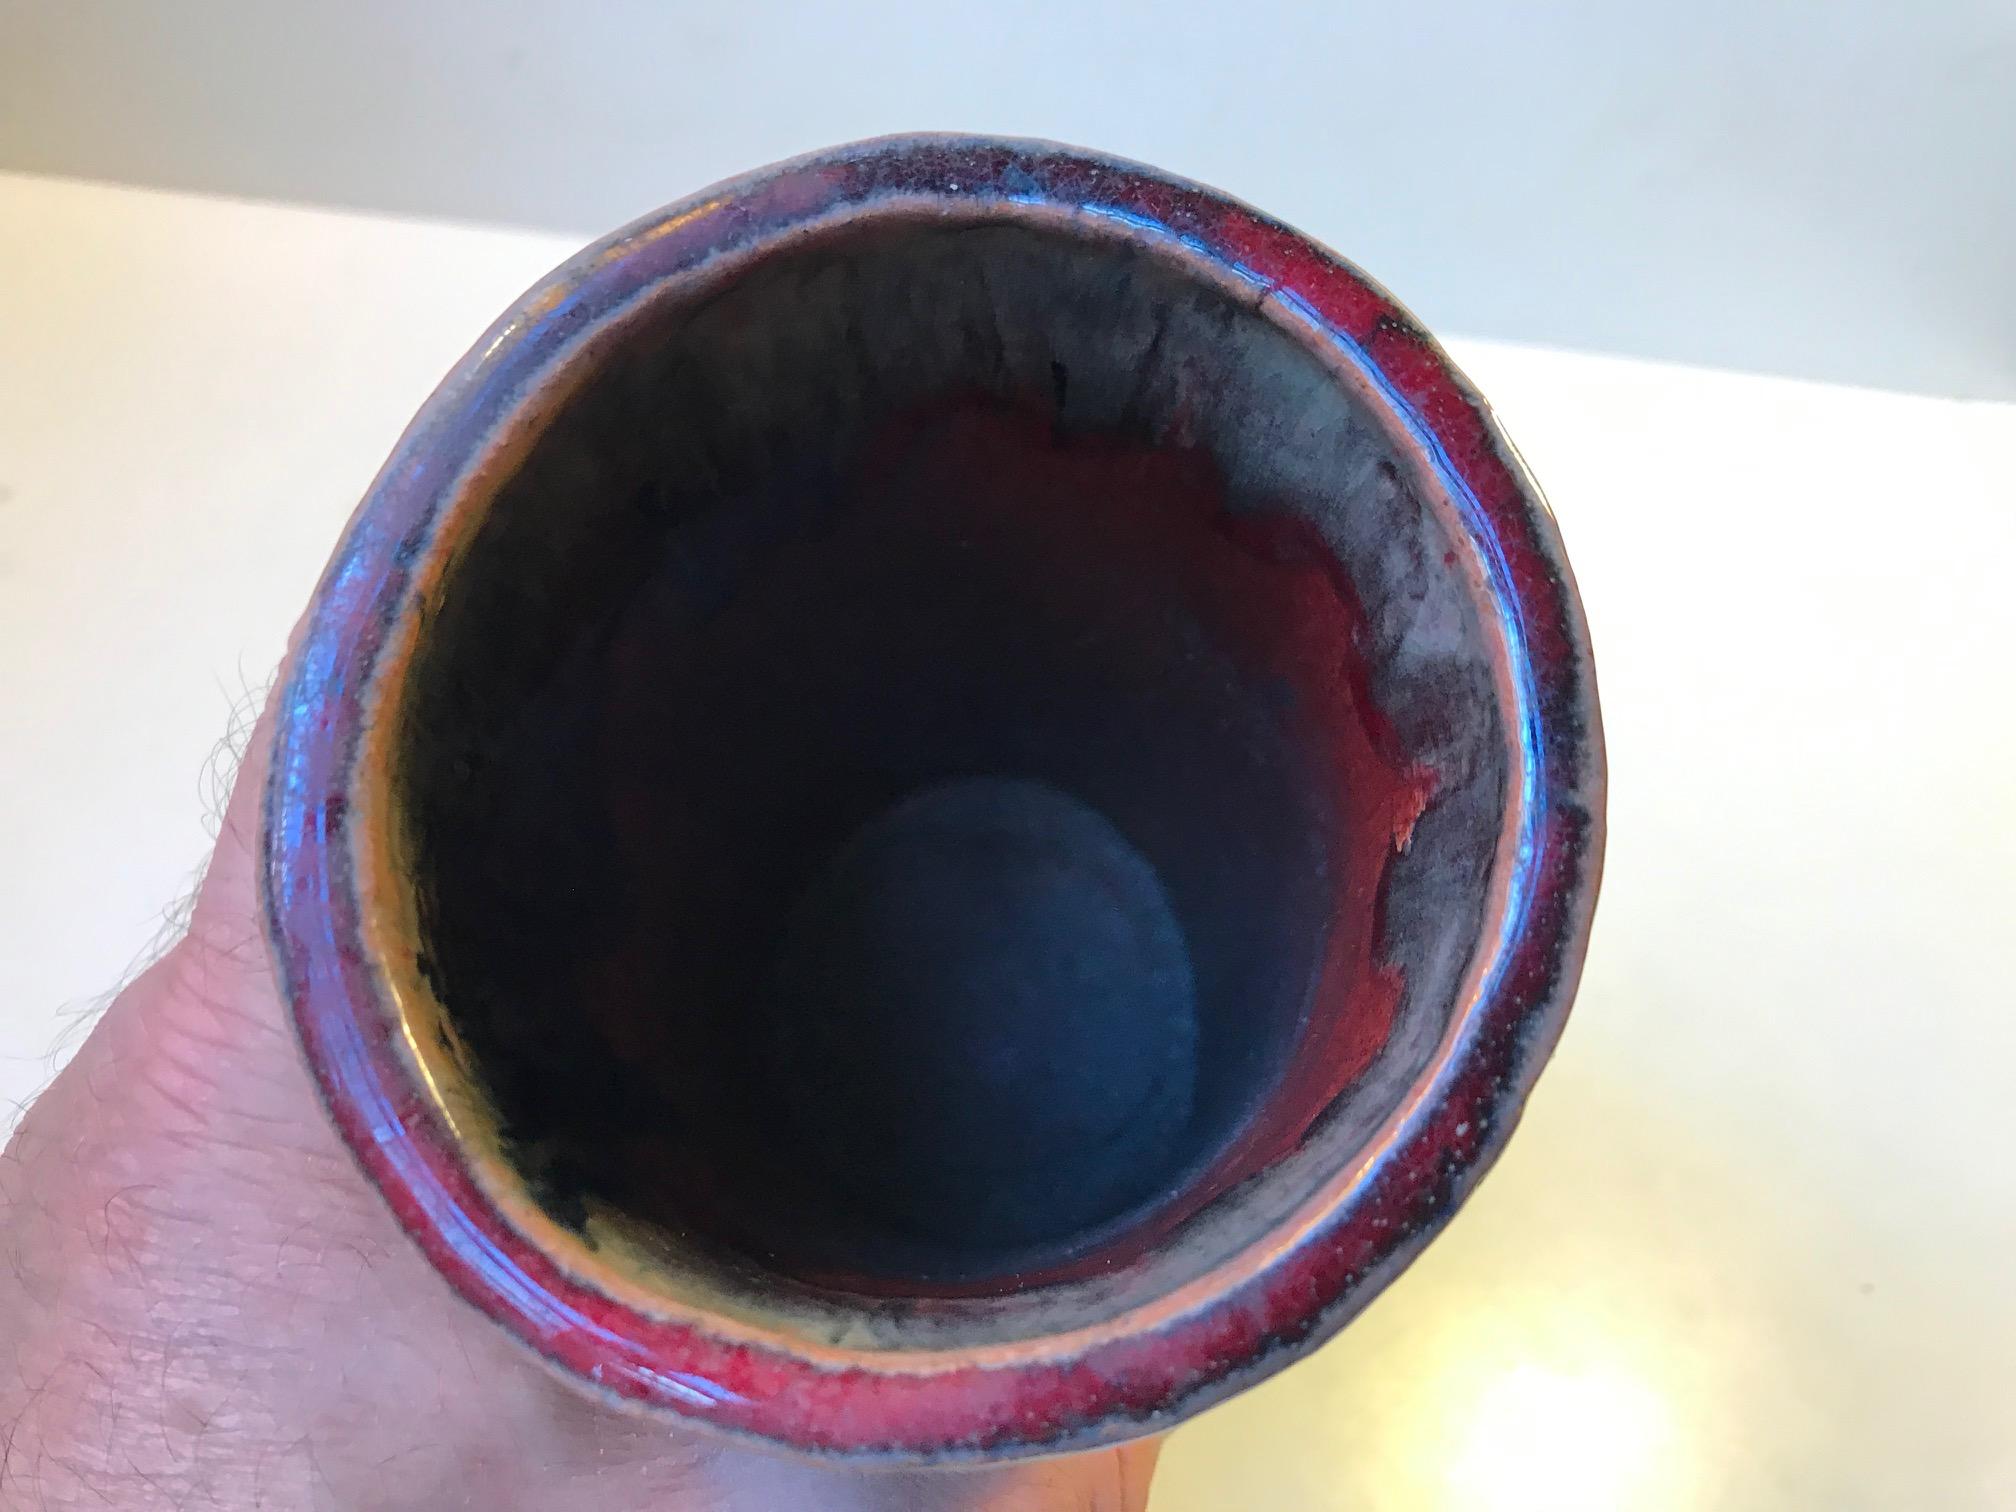 Unique Danish Cylindrical Ceramic Vase in Oxblood and Drip Glaze, 1960s For Sale 4